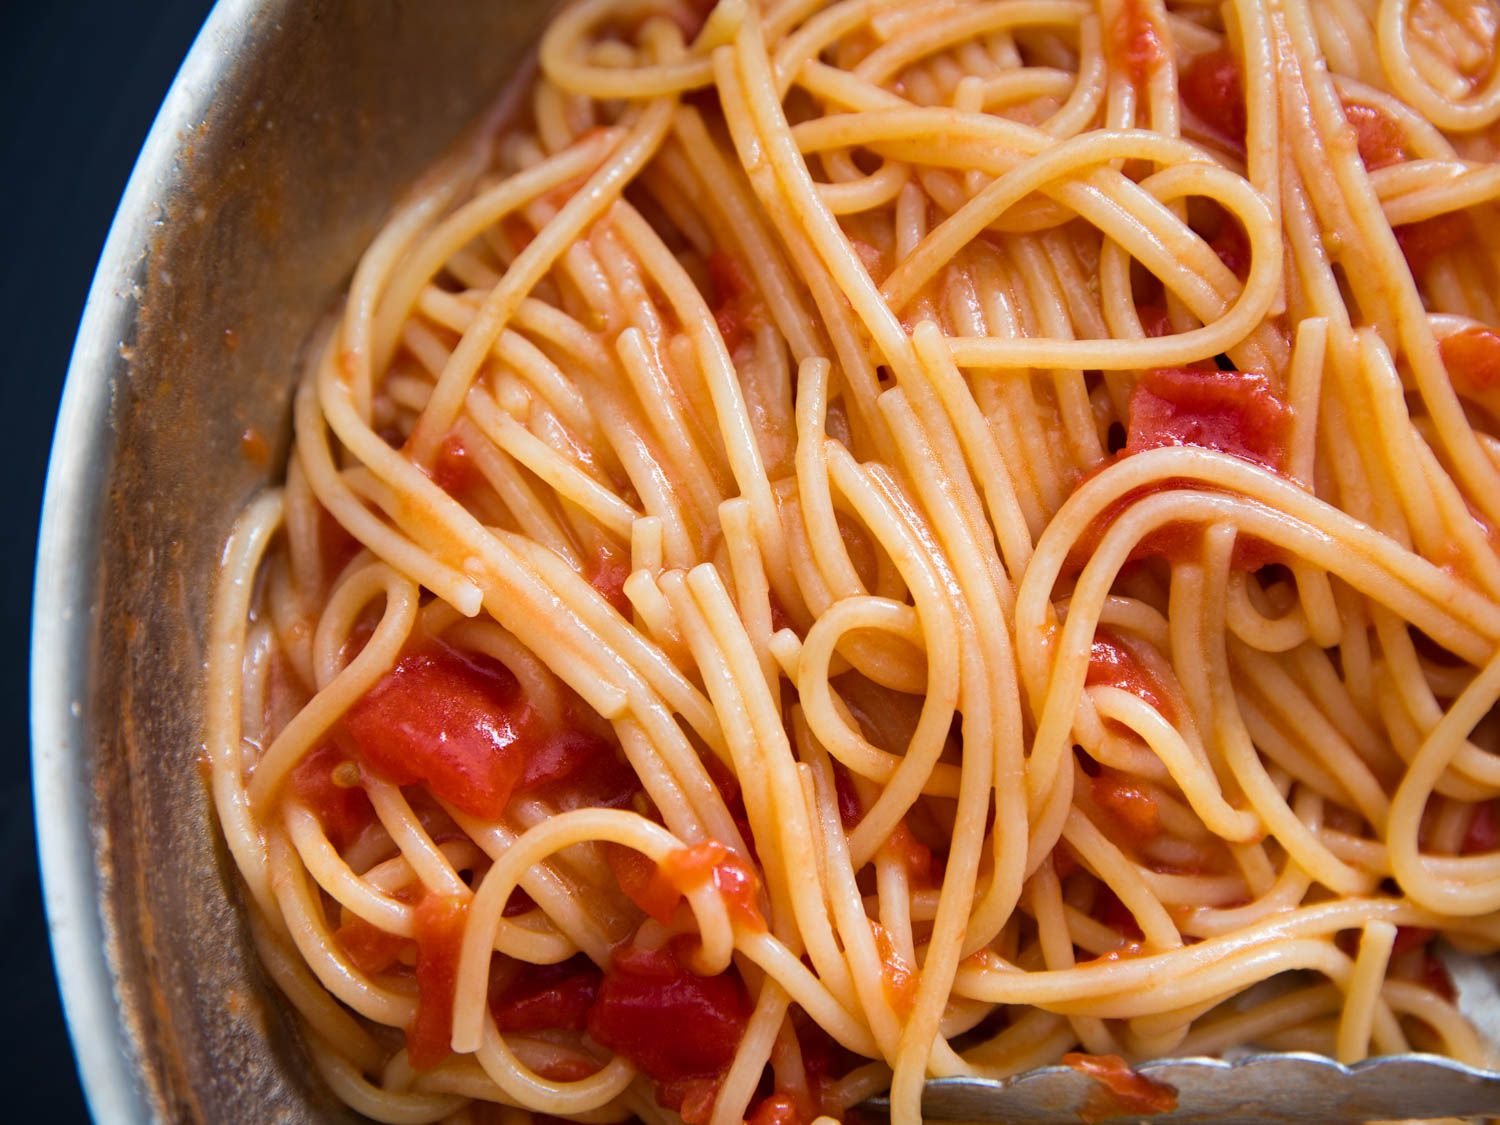 The Right Way to Sauce Pasta